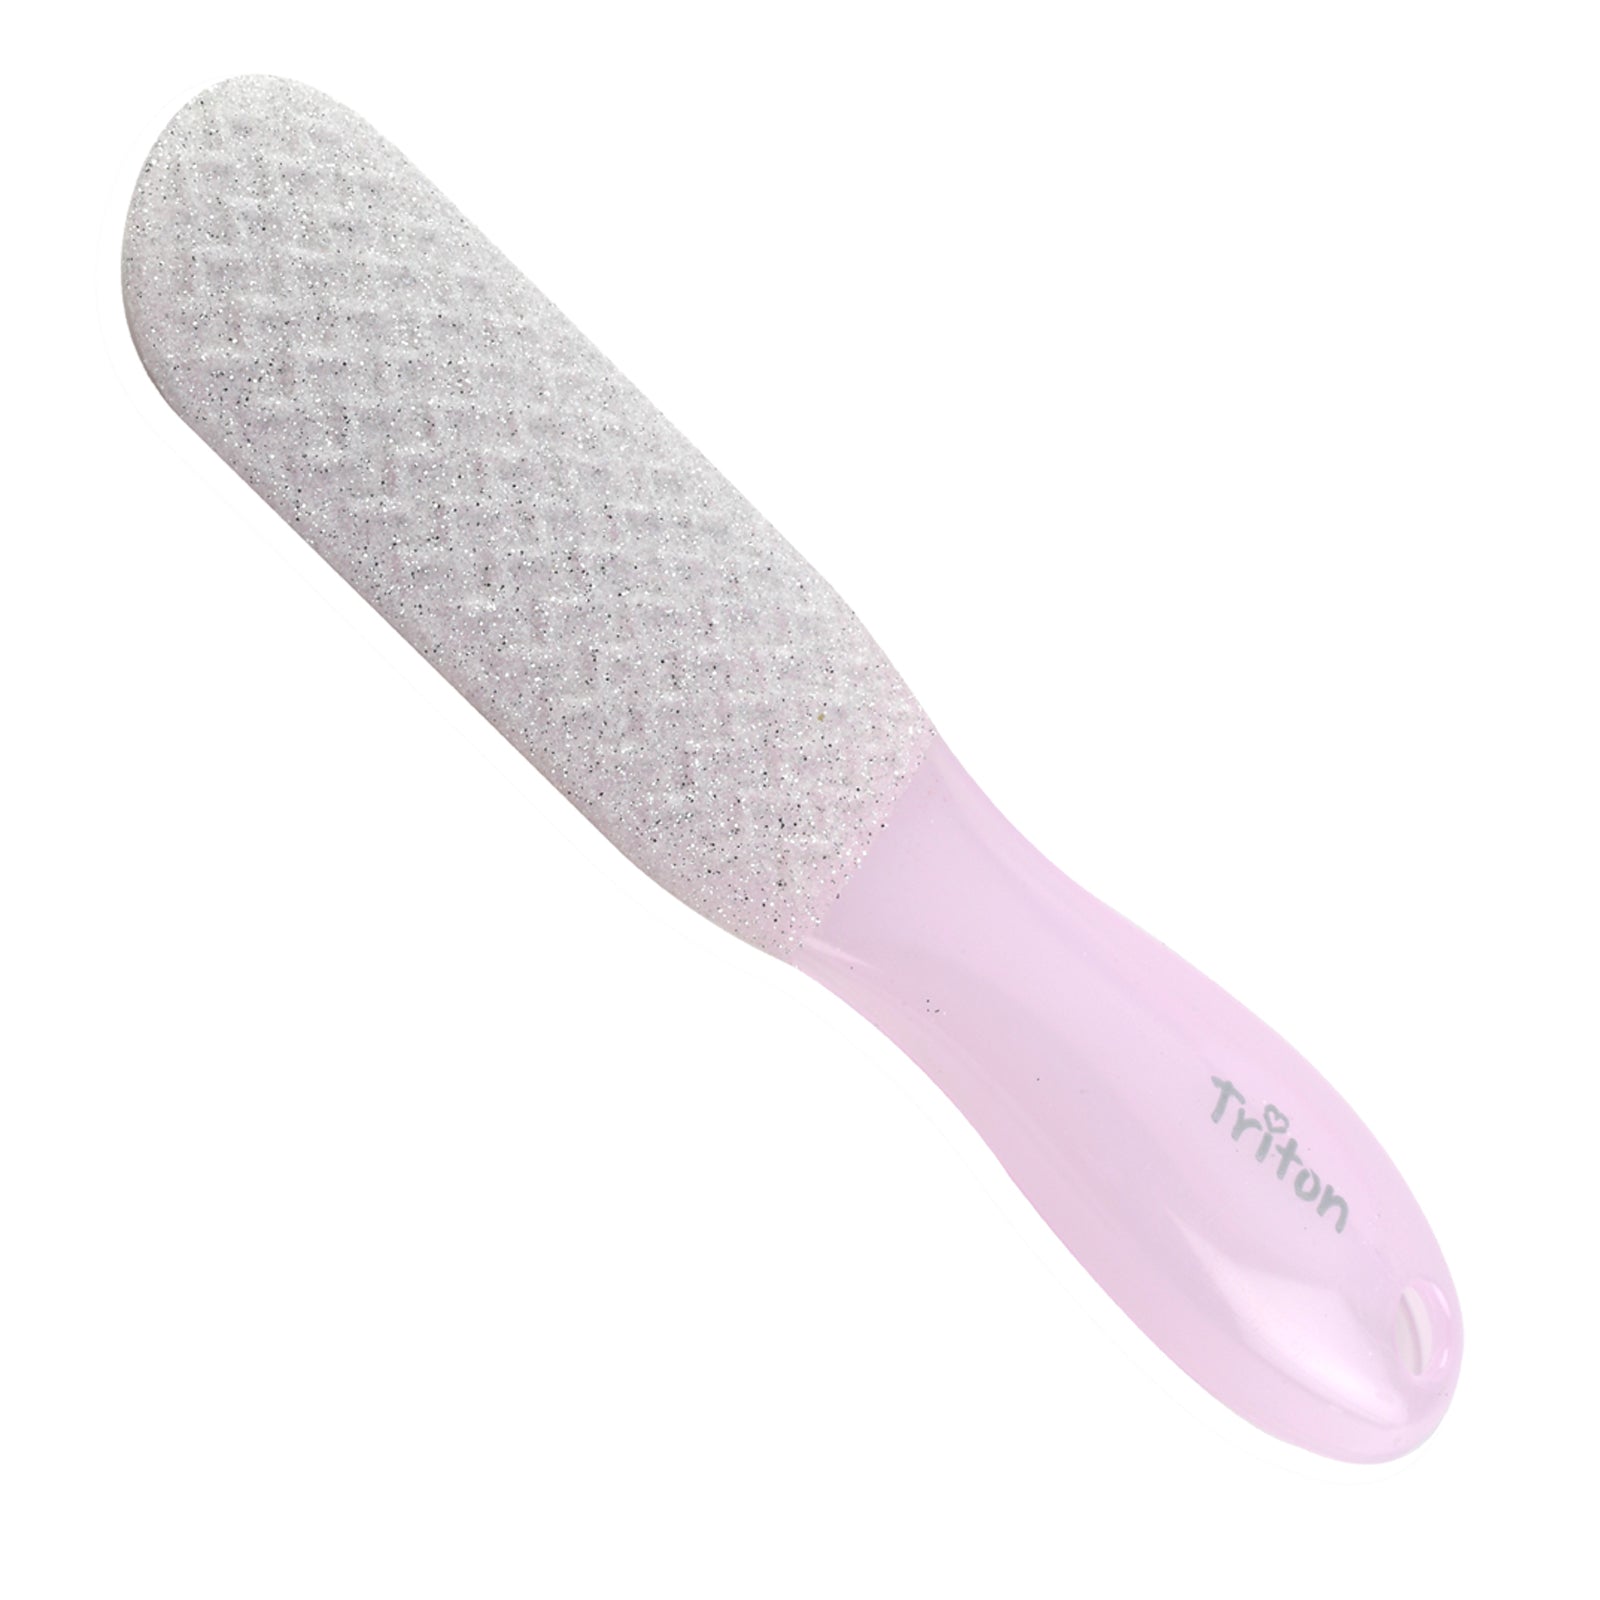 http://www.kokistory.com/cdn/shop/products/triton-emery-dual-sided-foot-scrubber-filer-with-shimmer-stones-for-hard-n-dead-skin-callus-remover-pedicure-foot-scrubber-foot-scrubbers.jpg?v=1674031057